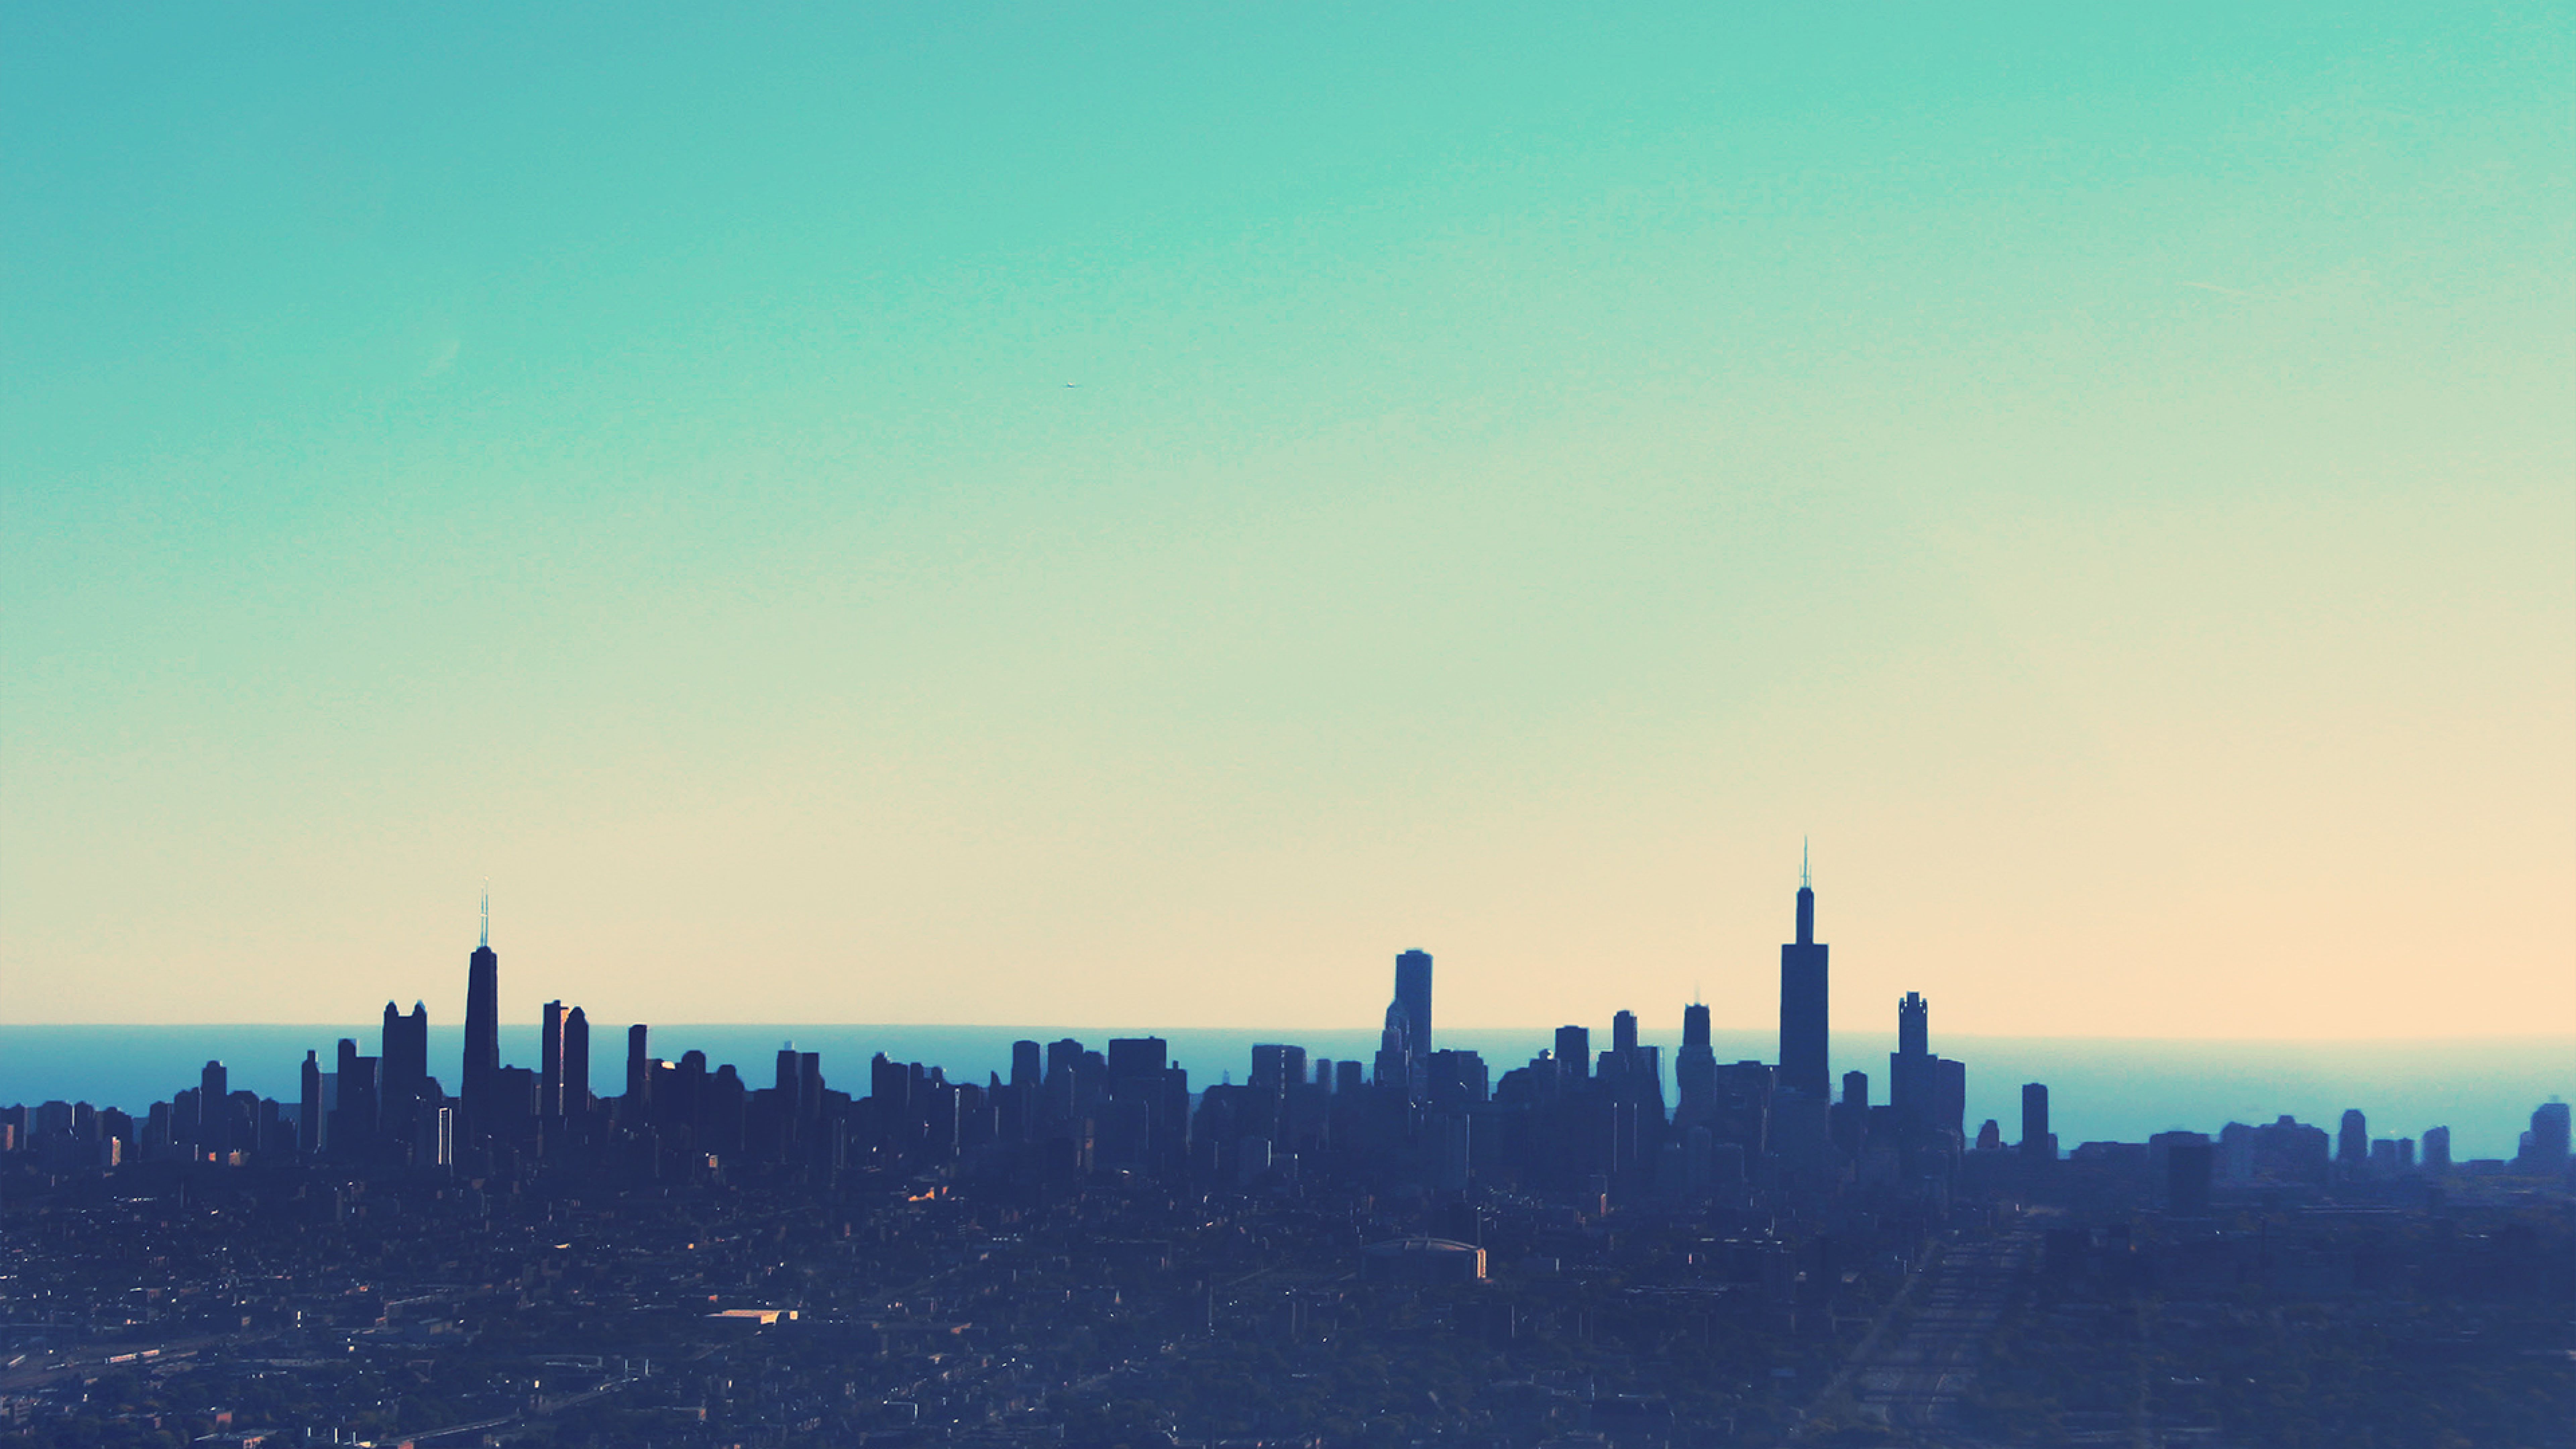 Chicago City Skyline 8K Wallpaper, HD City 4K Wallpaper, Image, Photo and Background